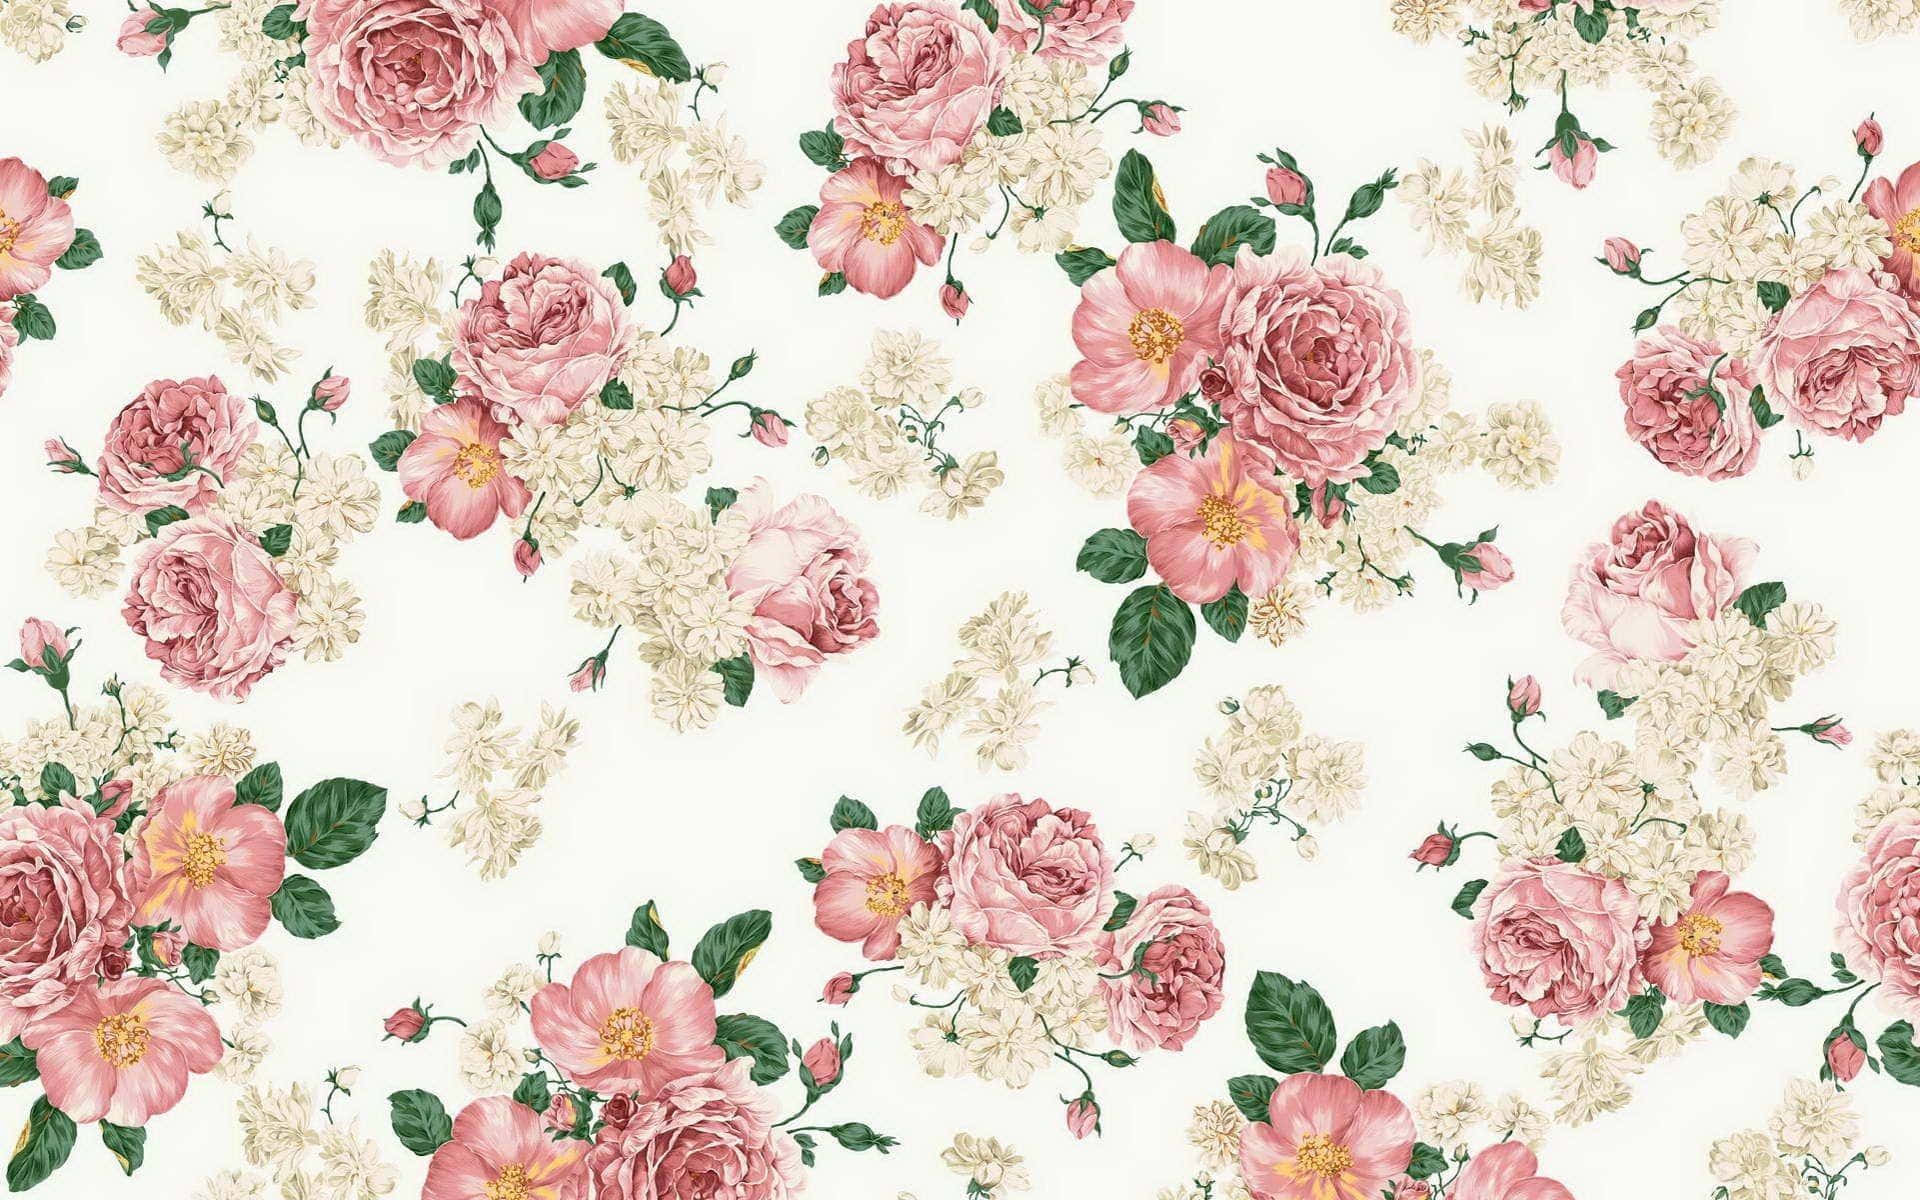 Brighten Up Your Day with Aesthetic Floral Wallpaper